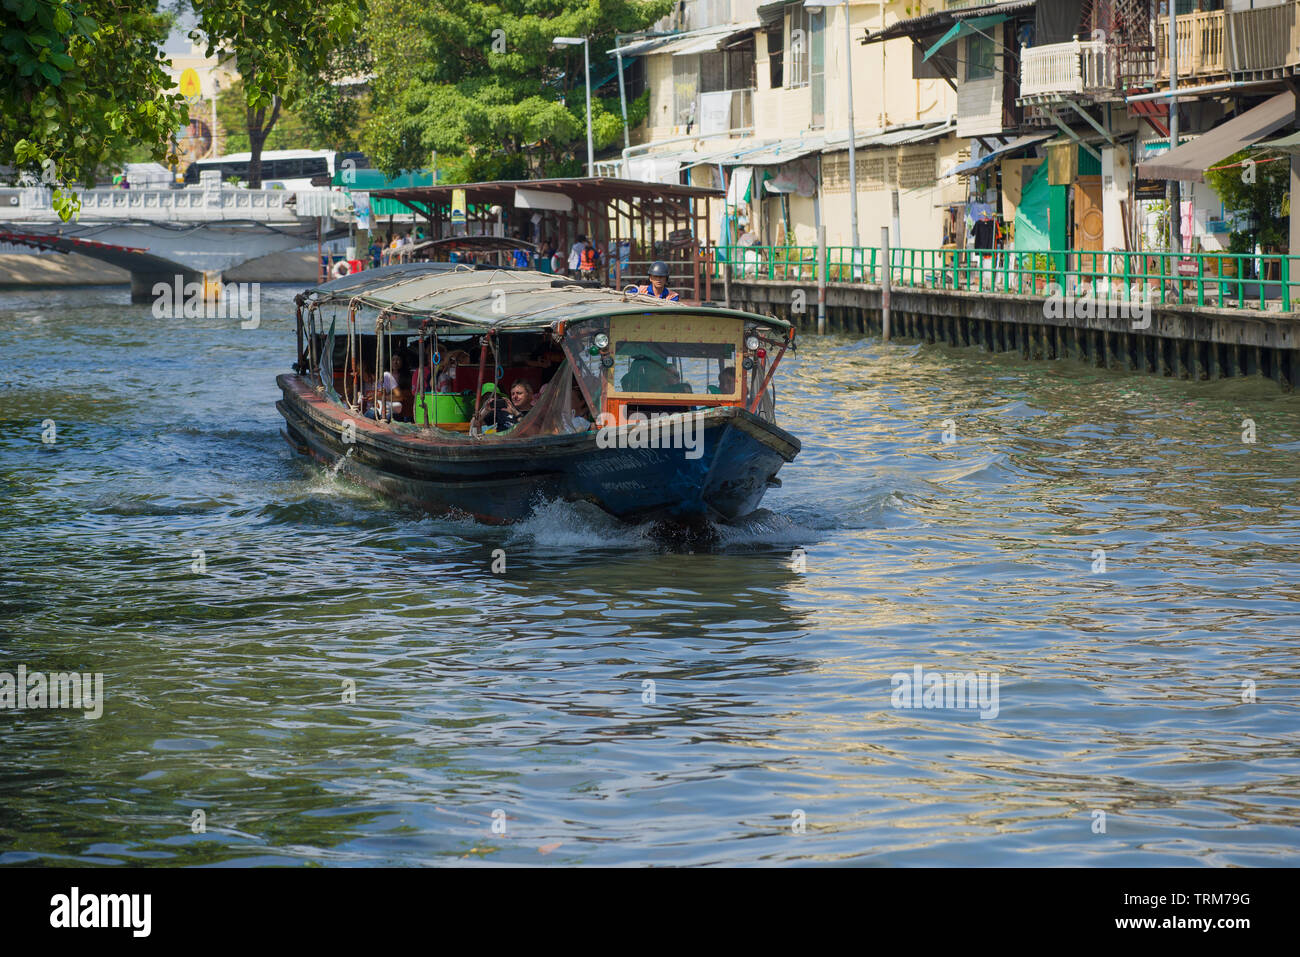 BANGKOK, THAILAND - DECEMBER 29, 2018: Passenger route boat on the city canal on a sunny afternoon Stock Photo